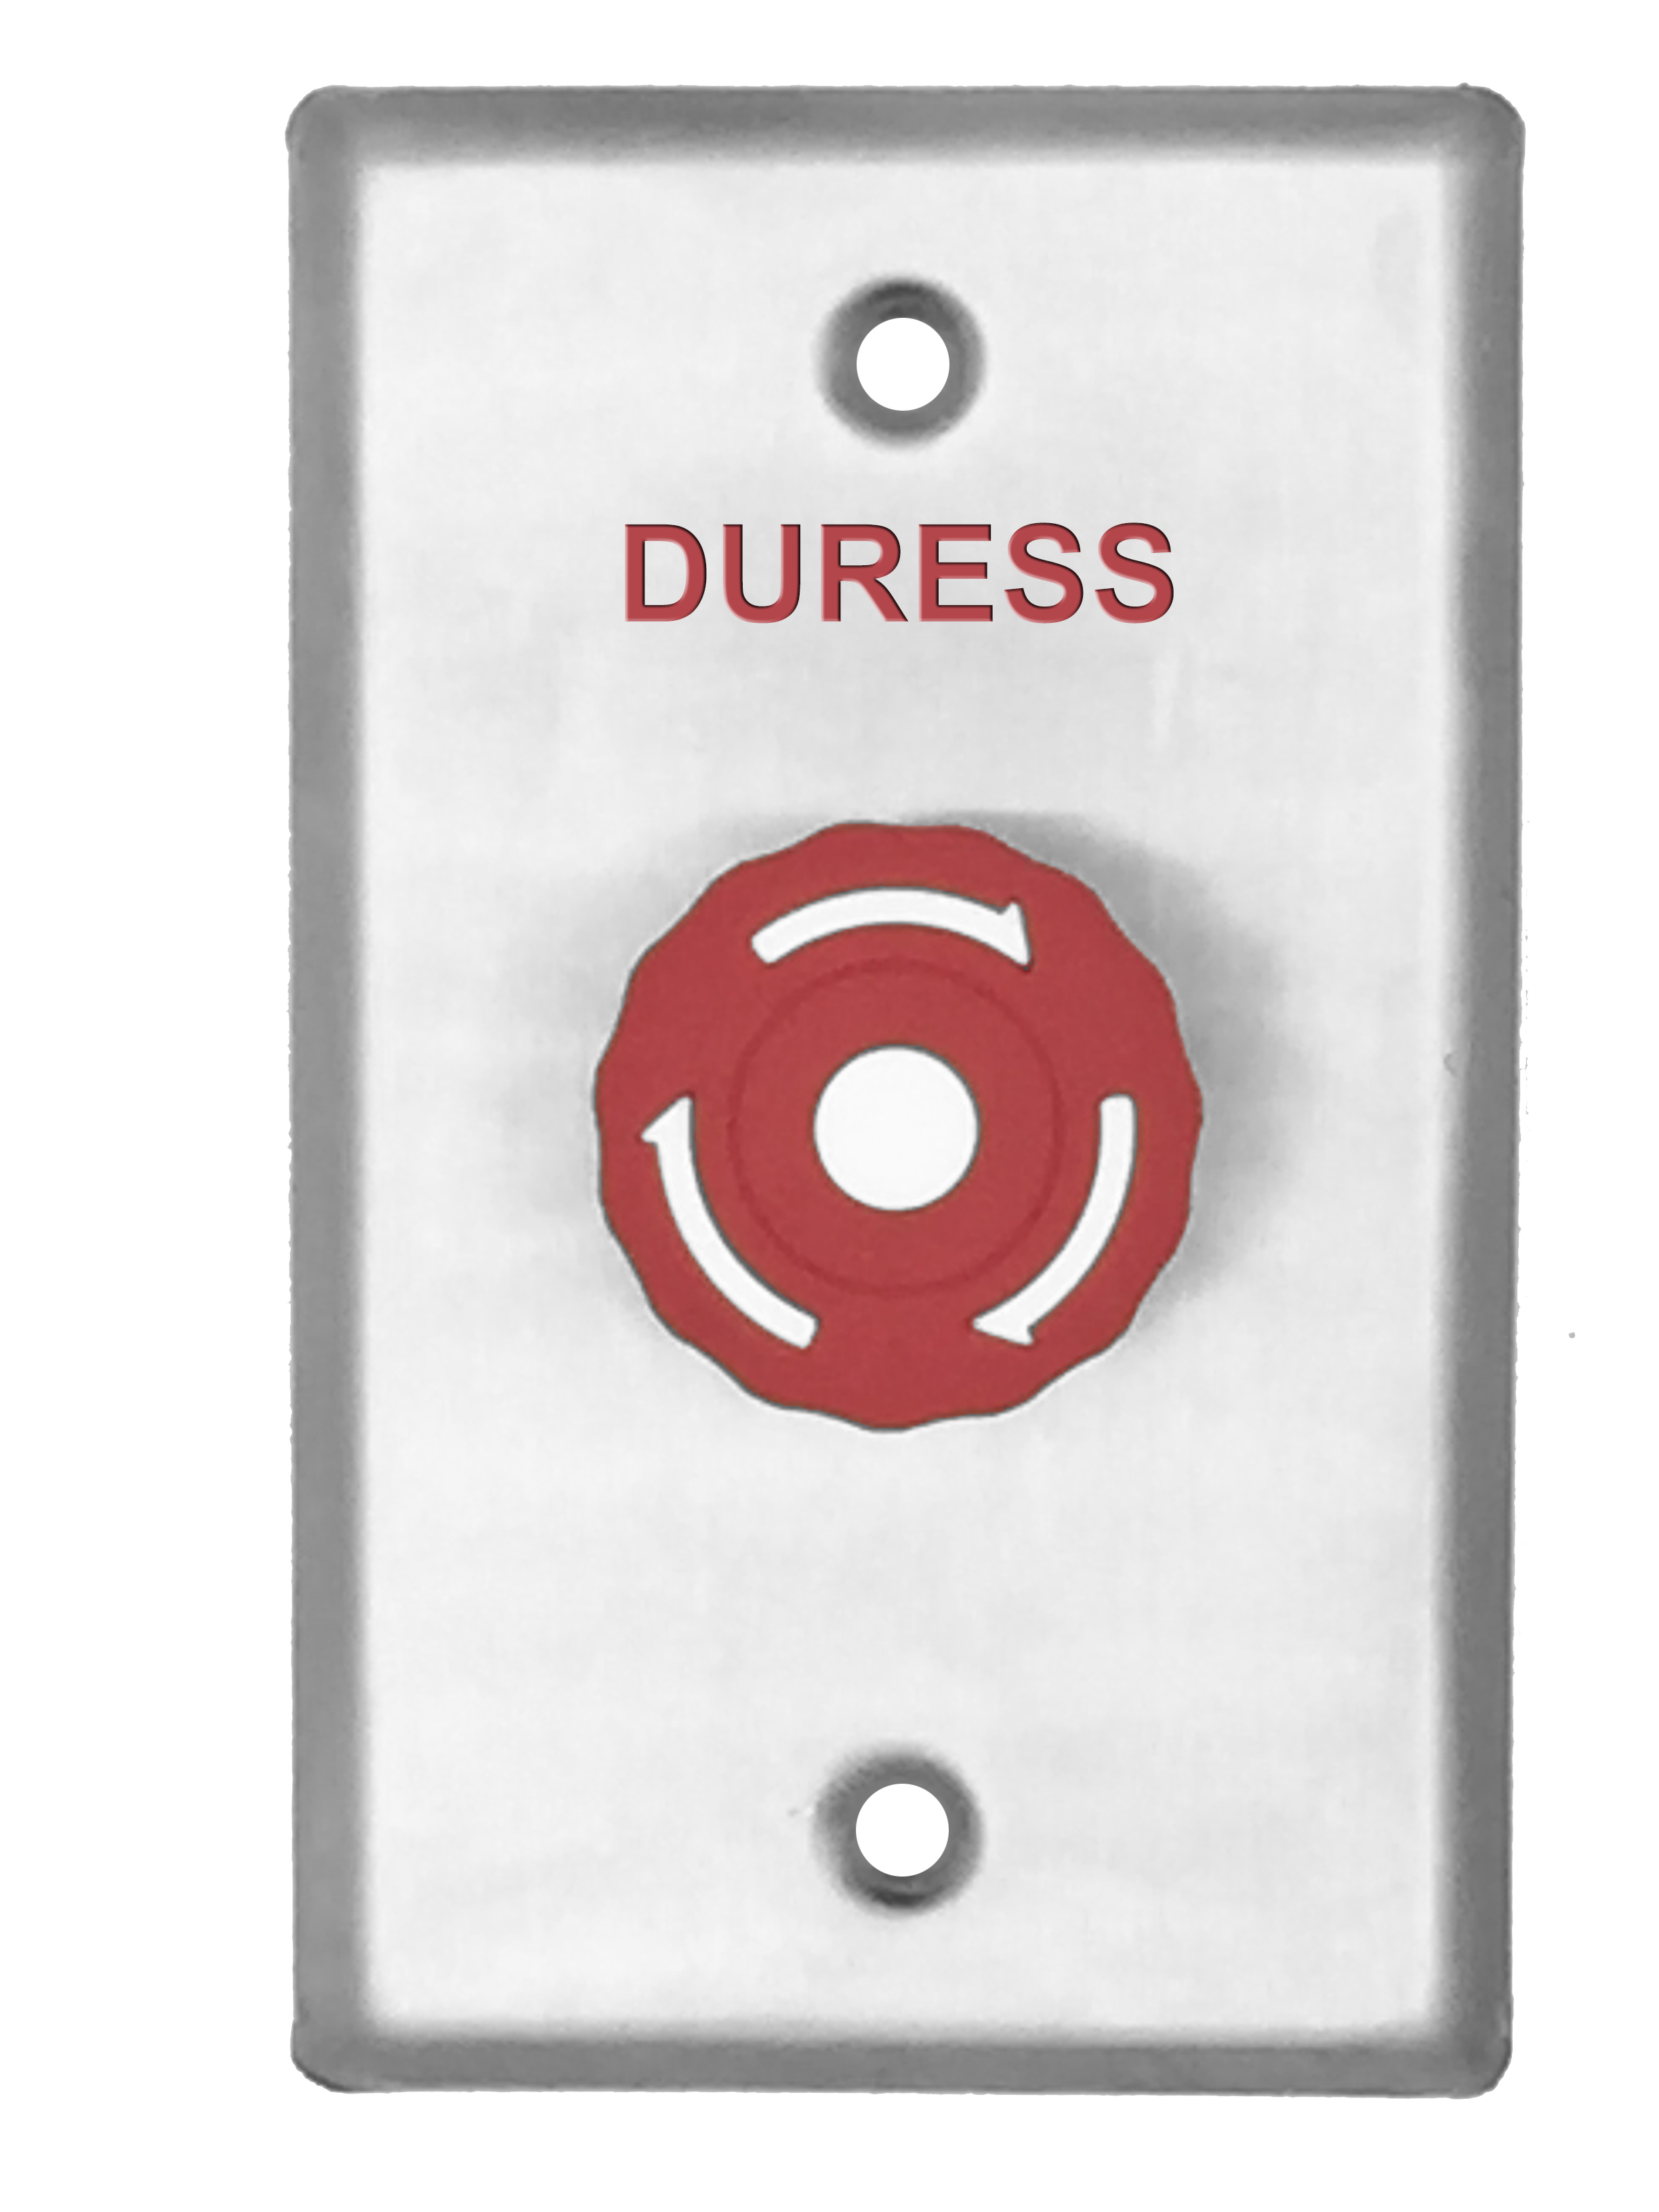 TWIST-TO-RELEASE BUTTON RED MUSHROOM HEAD ON CURVED EDGE STANDARD STAINLESS STEEL PLATE WITH 